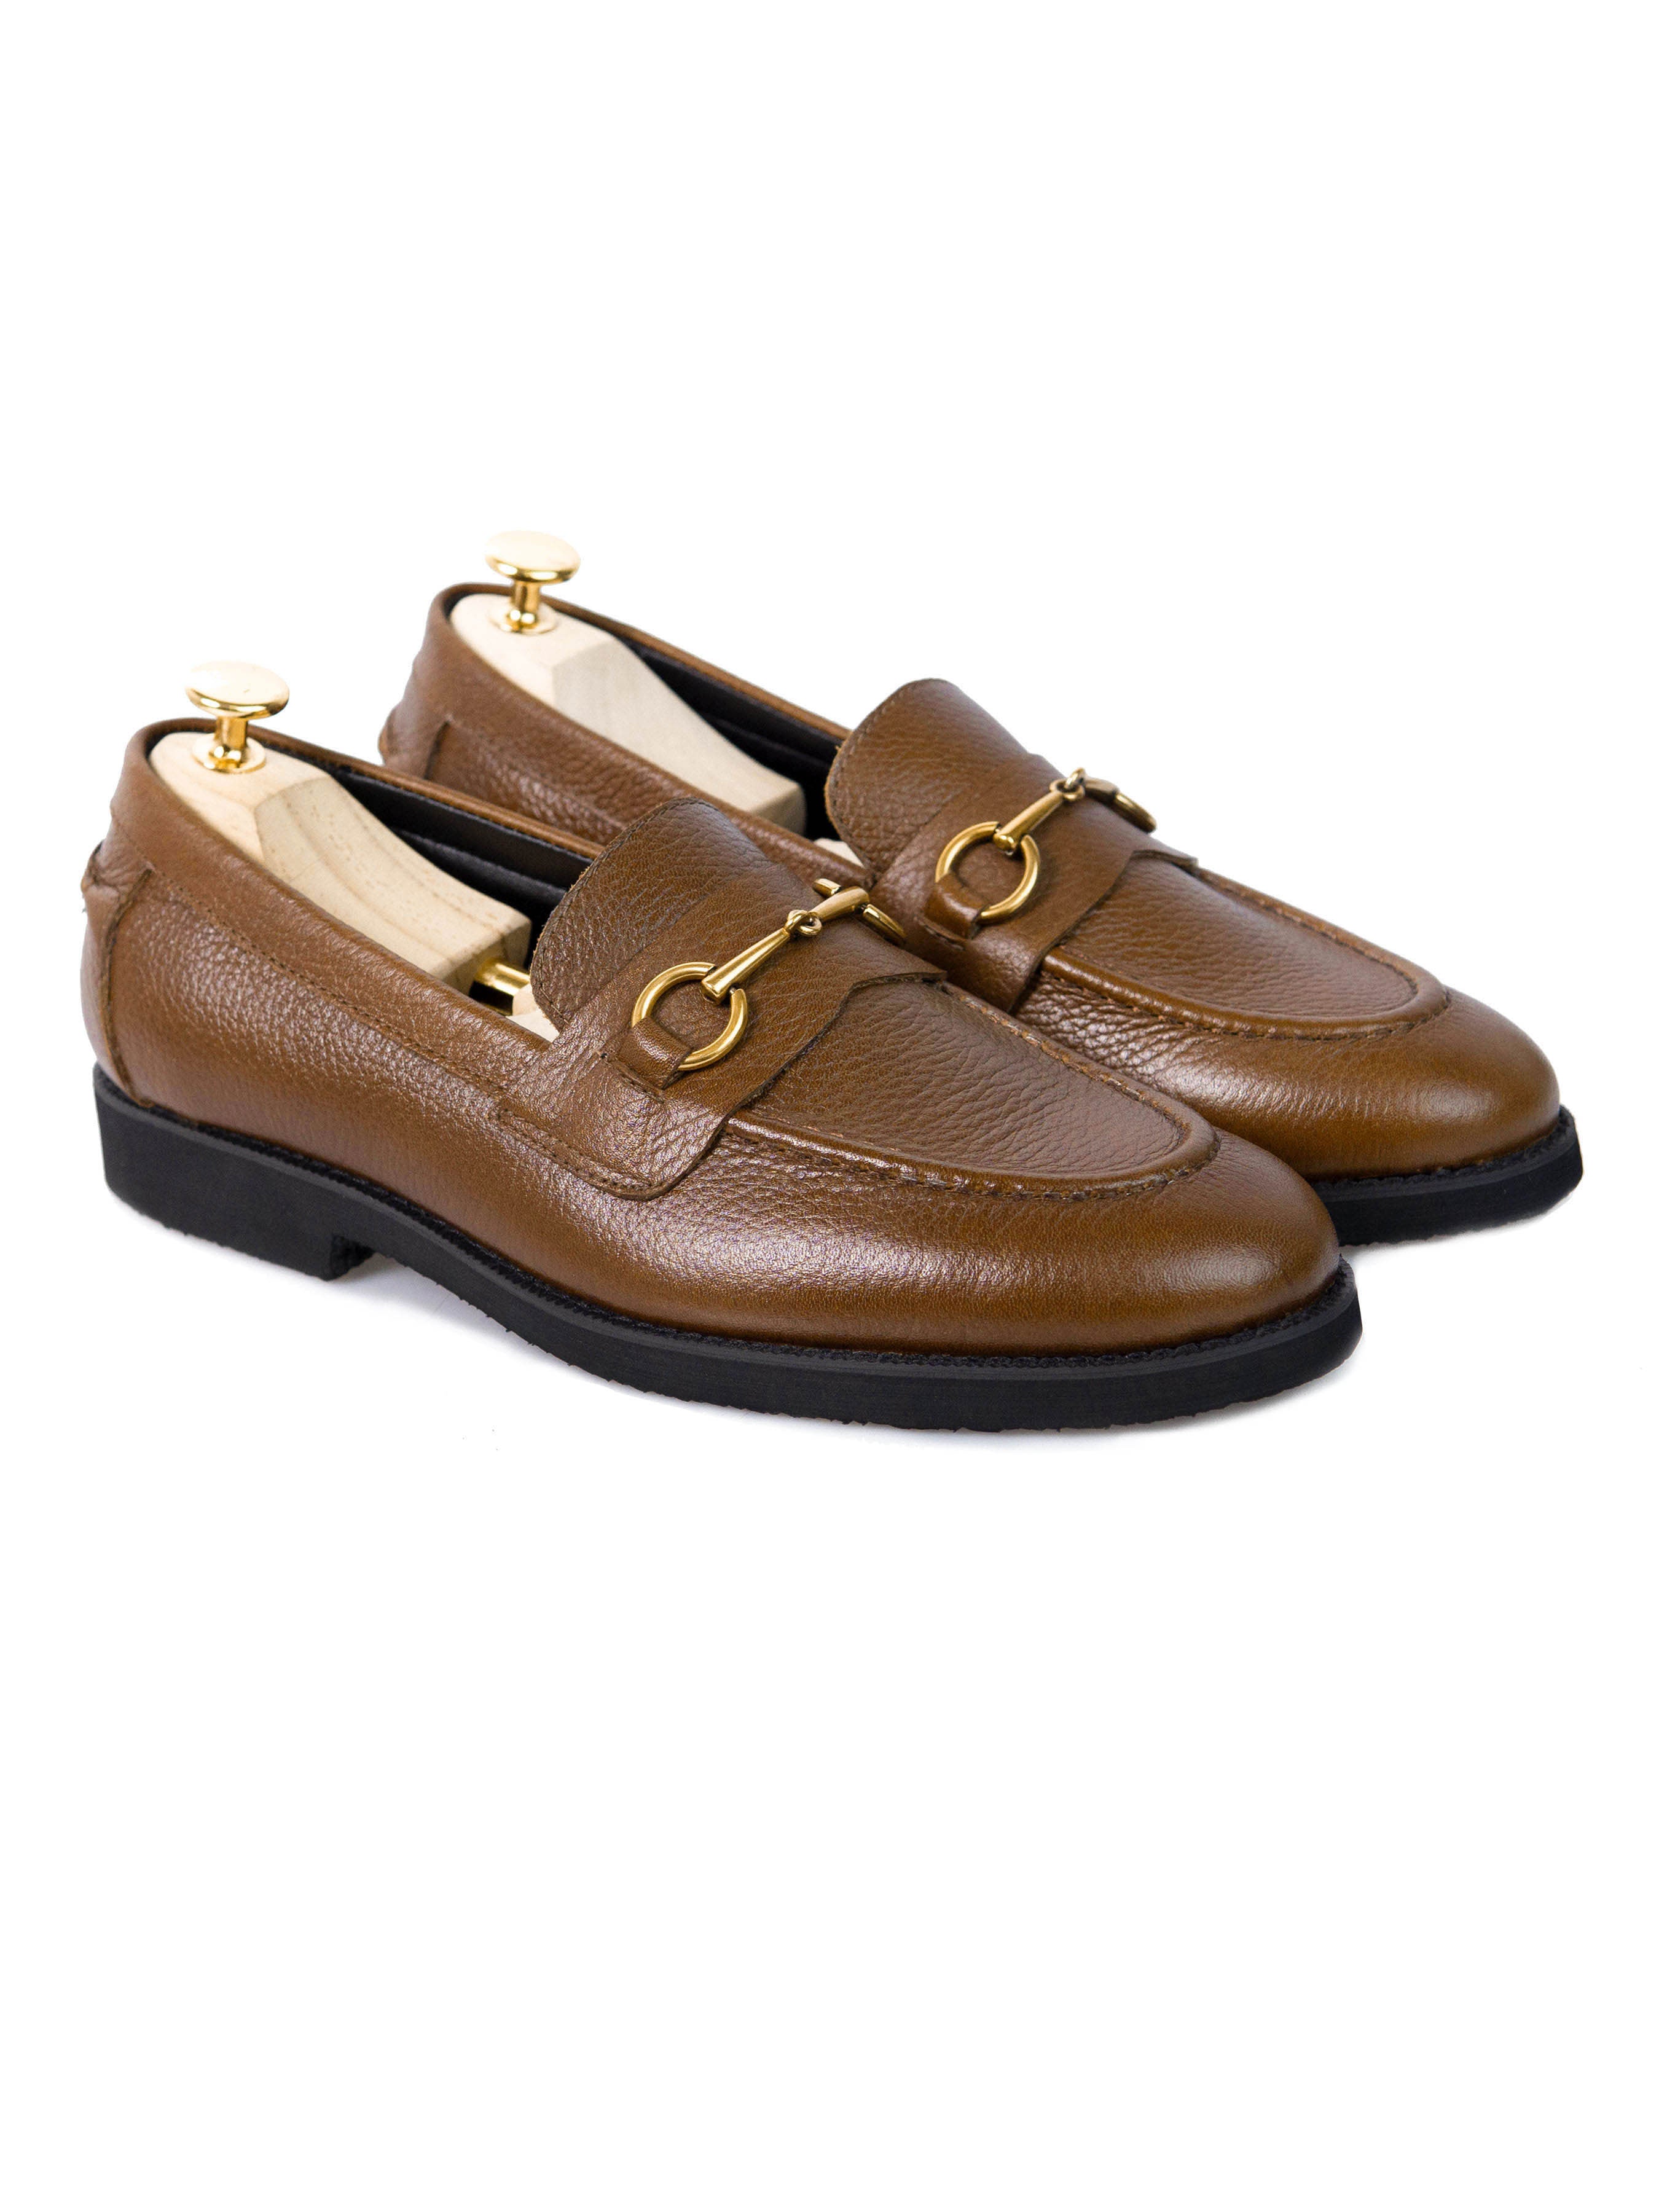 Penny Loafer Horsebit Buckle - Tobacco Brown Pebble Grain Leather (Crepe Sole) - Zeve Shoes